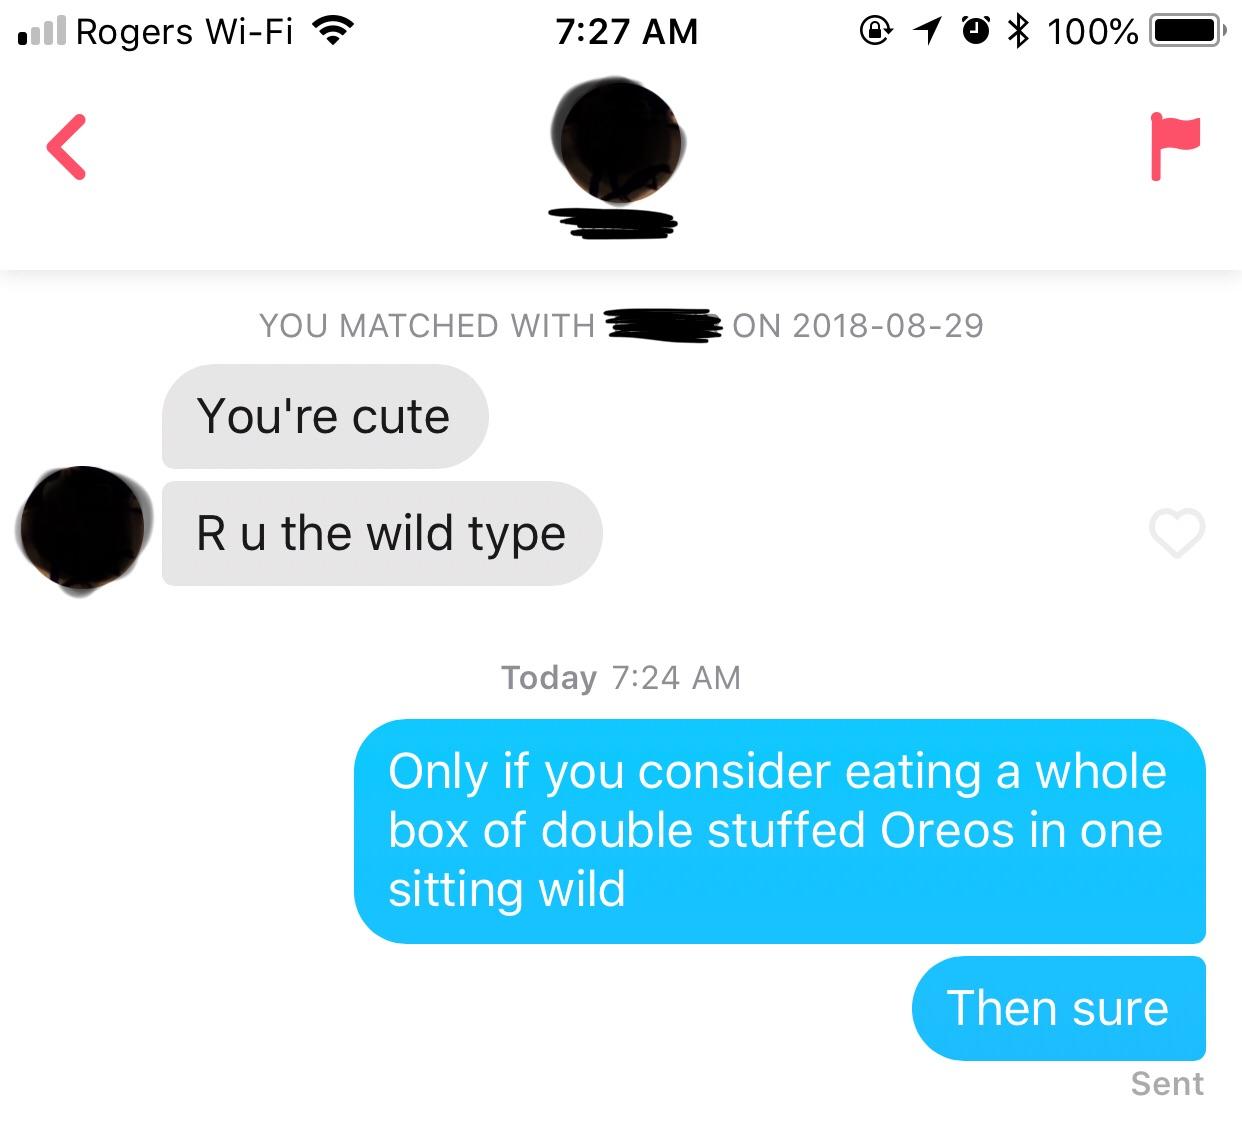 tinder - communication - vil Rogers WiFi @ 10 100% O You Matched With On You're cute Ru the wild type Today Only if you consider eating a whole box of double stuffed Oreos in one sitting wild Then sure Sent